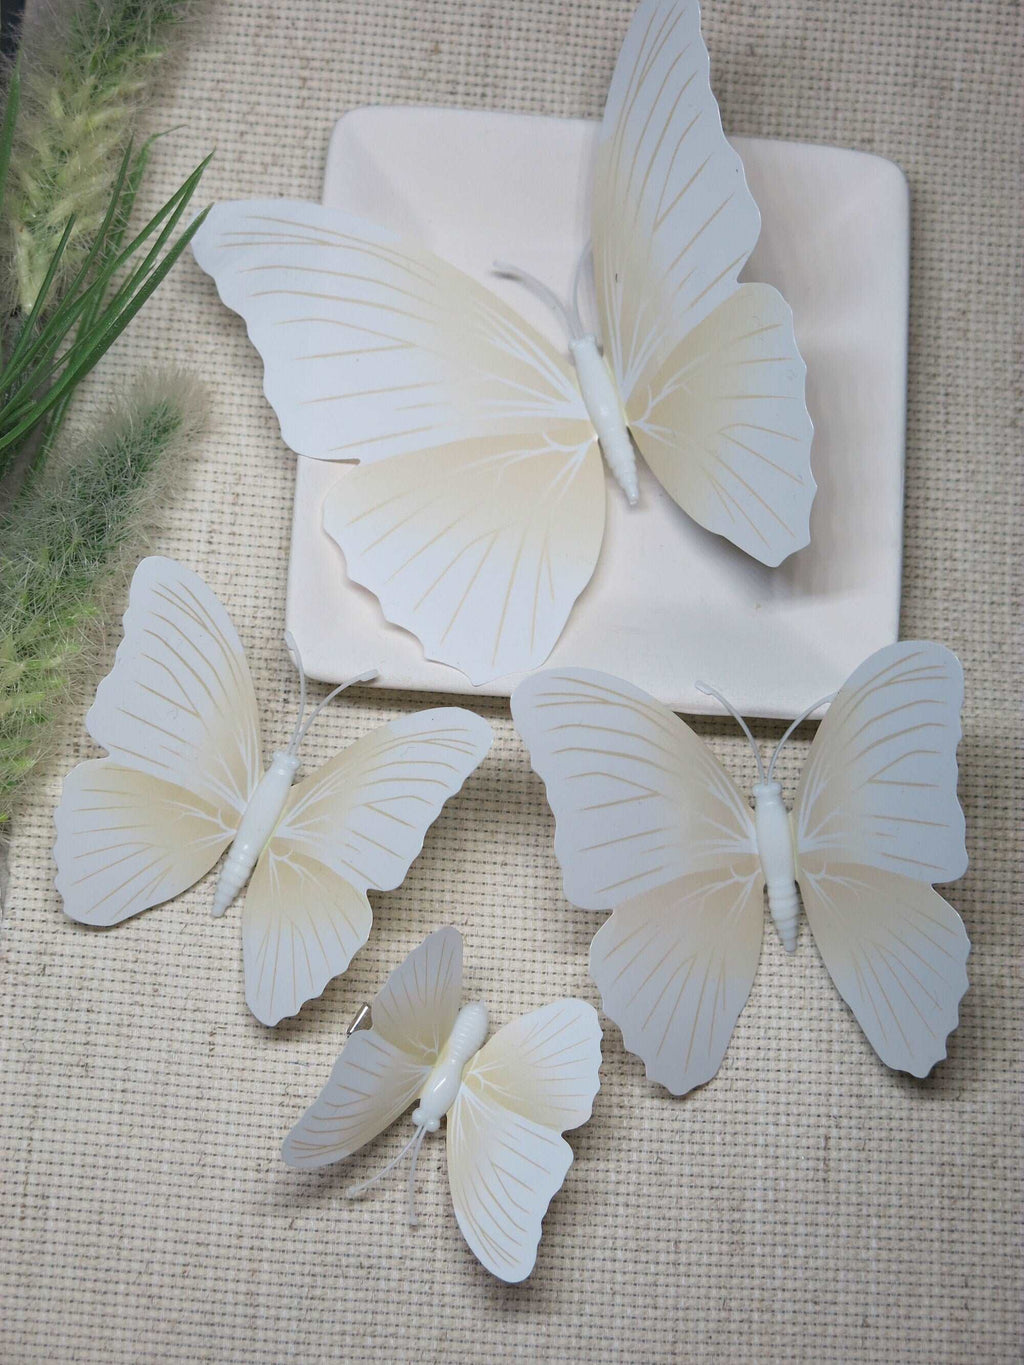 Big Butterfly 4 PC Hairclip Set, PVC Large Butterfly Wing Prom Hair Clips in Pink, White or Black - KaleaBoutique.com